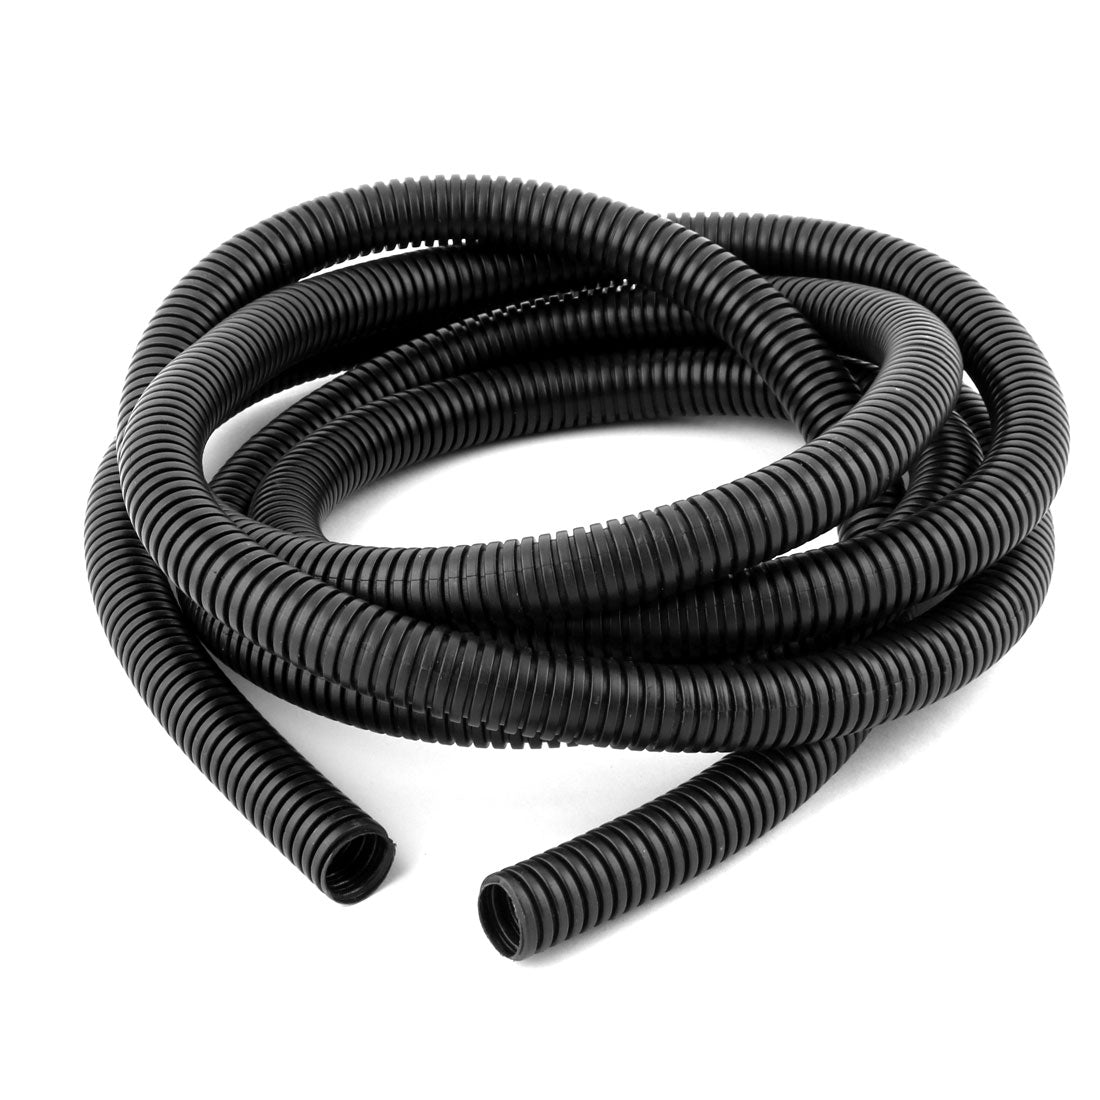 uxcell Uxcell 2.9 M 14.5 x 18 mm PVC Flexible Corrugated Conduit Tube for Garden,Office Black